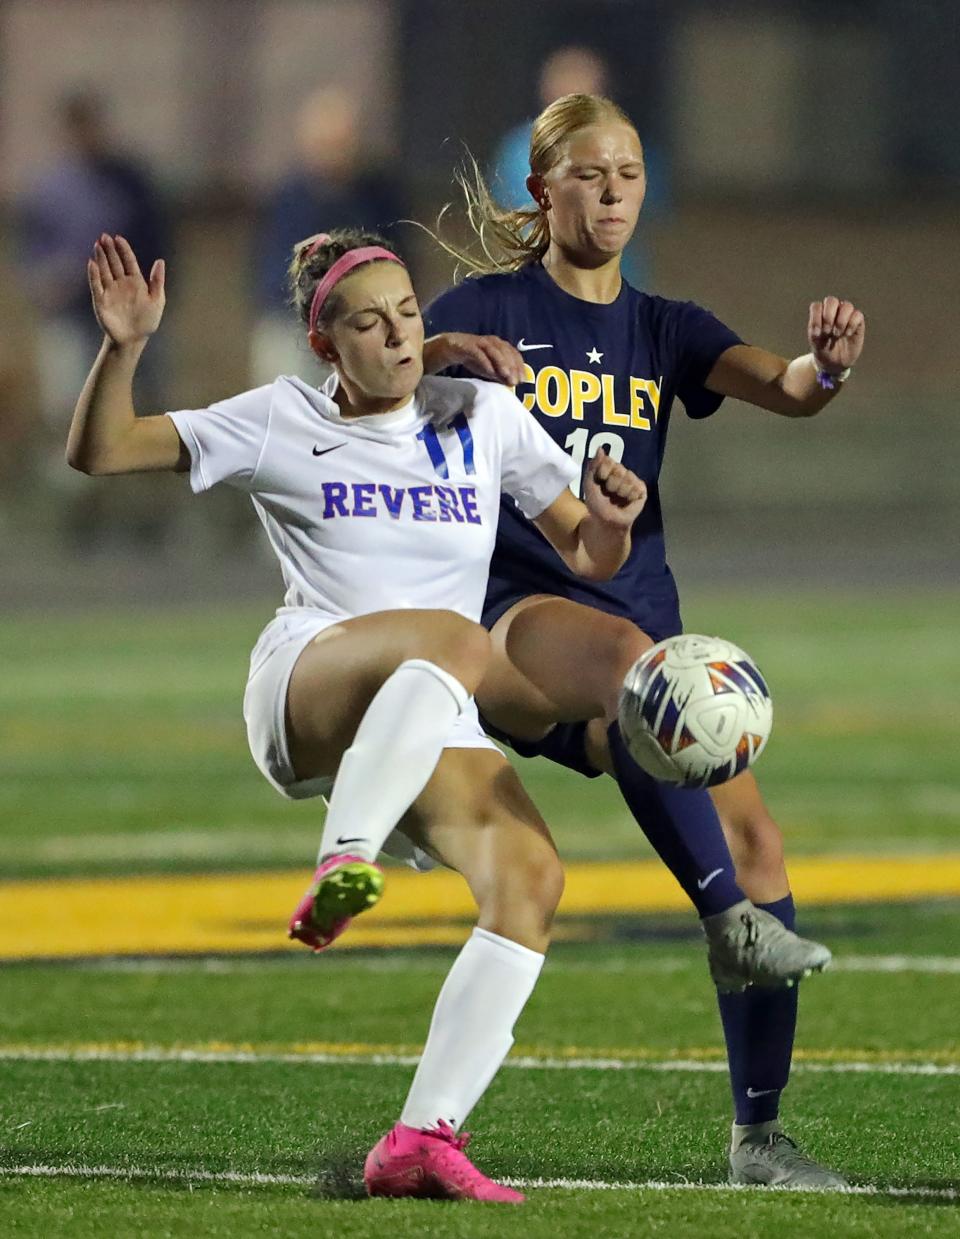 Revere's Lily Hughes, left, and Copley's Emily Kerekes battle for the ball during the second half Wednesday in Copley.